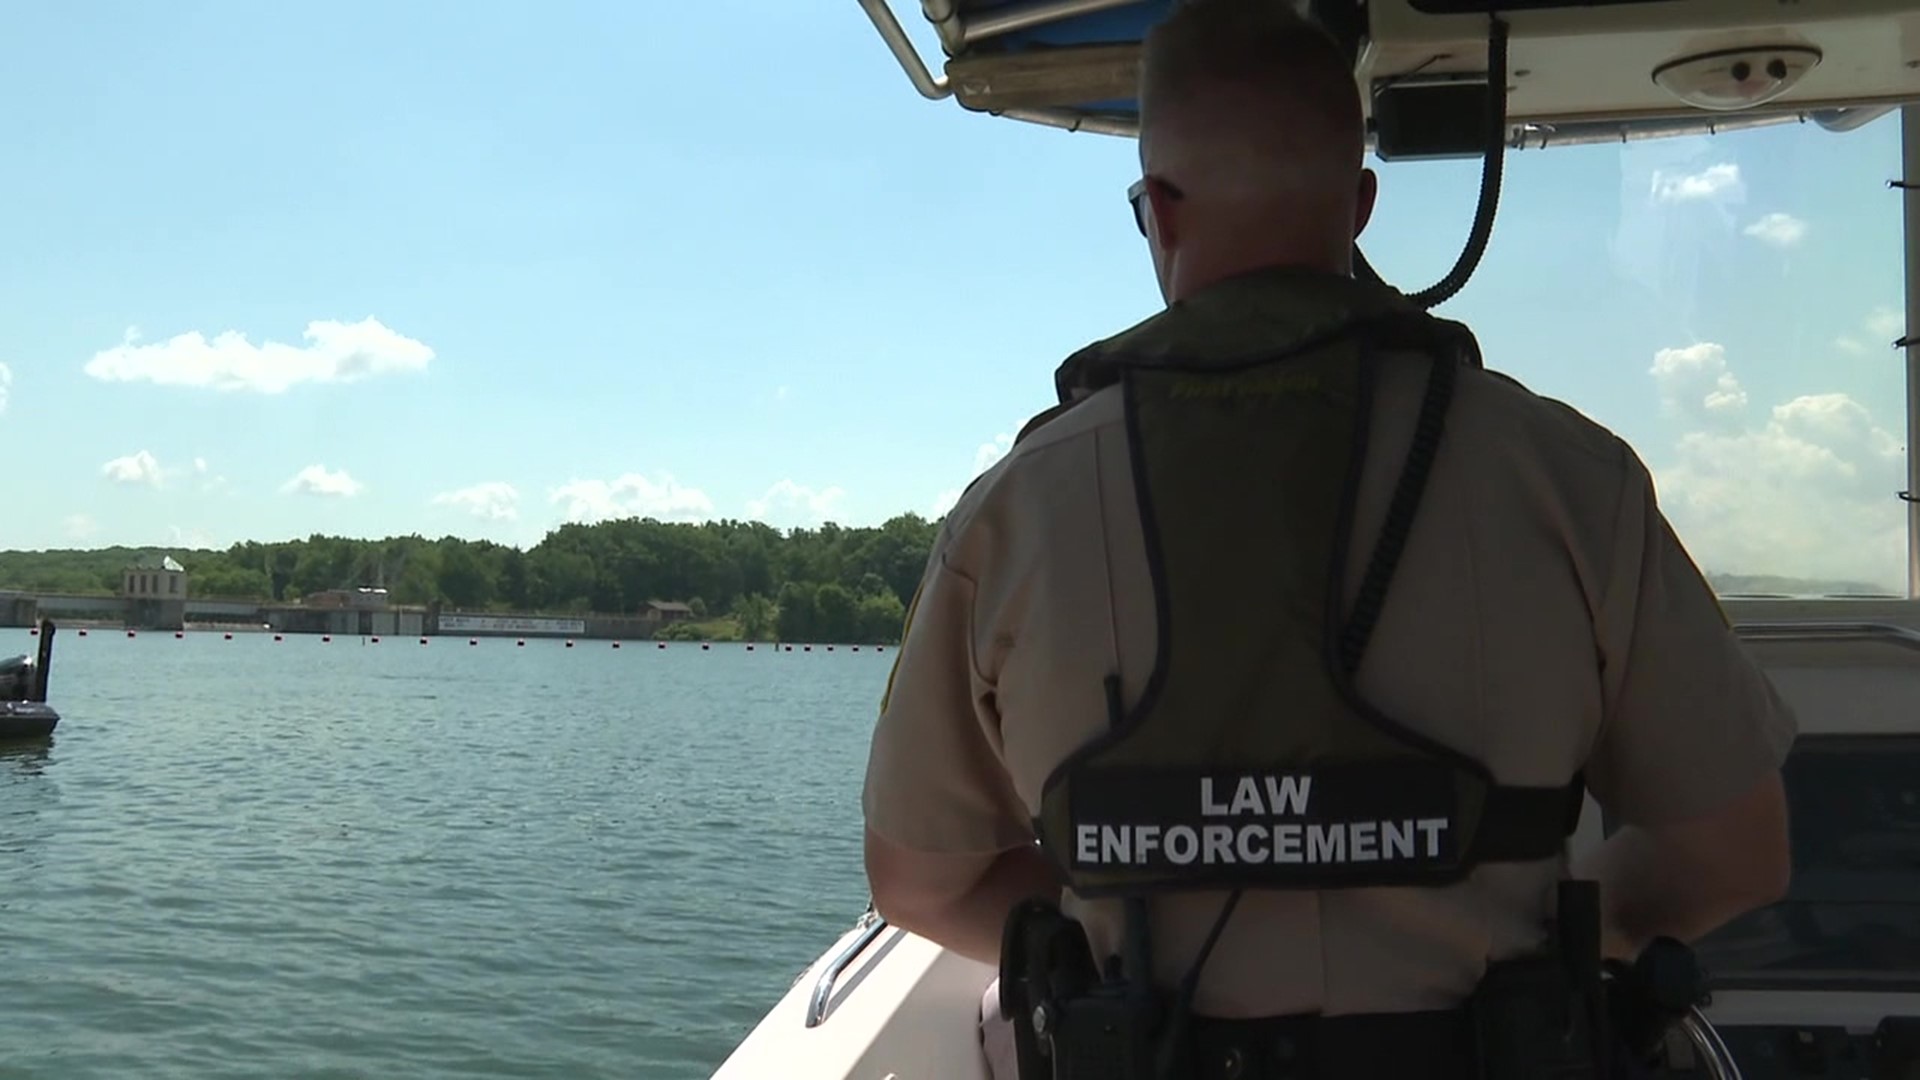 Newswatch 16's Courtney Harrison explains that officials will be on the lookout for anyone drinking and boating this holiday weekend.